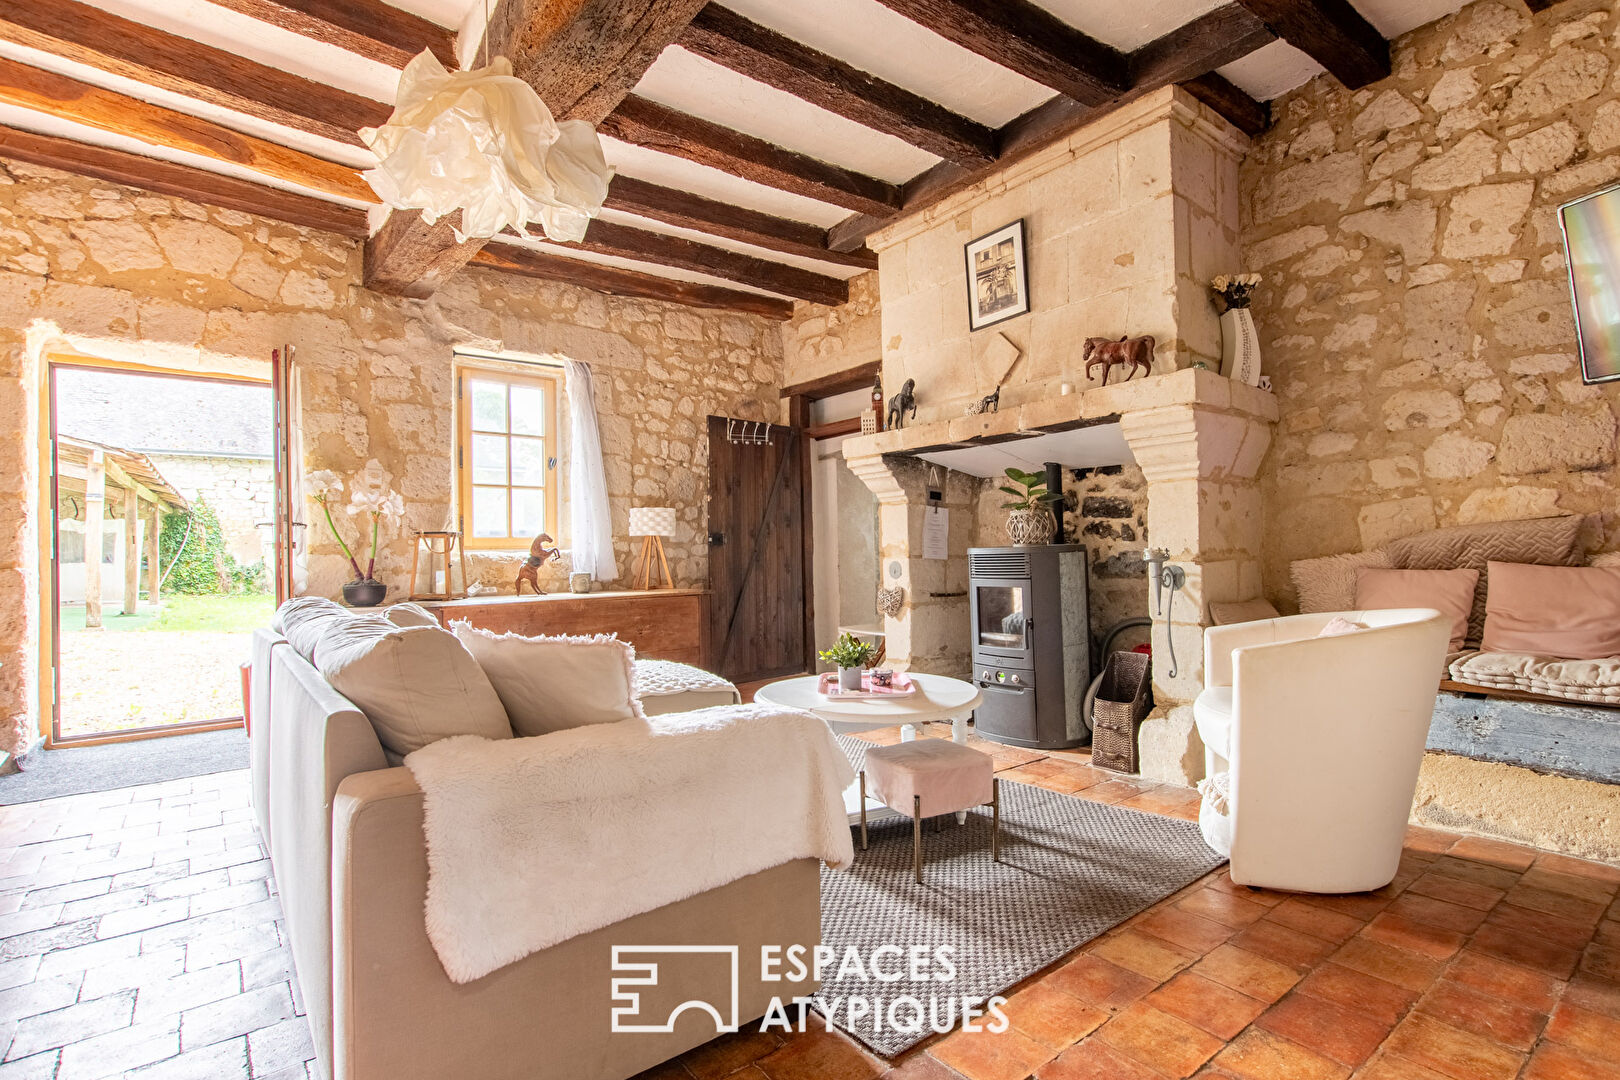 Accommodation with authentic charm and its outbuildings